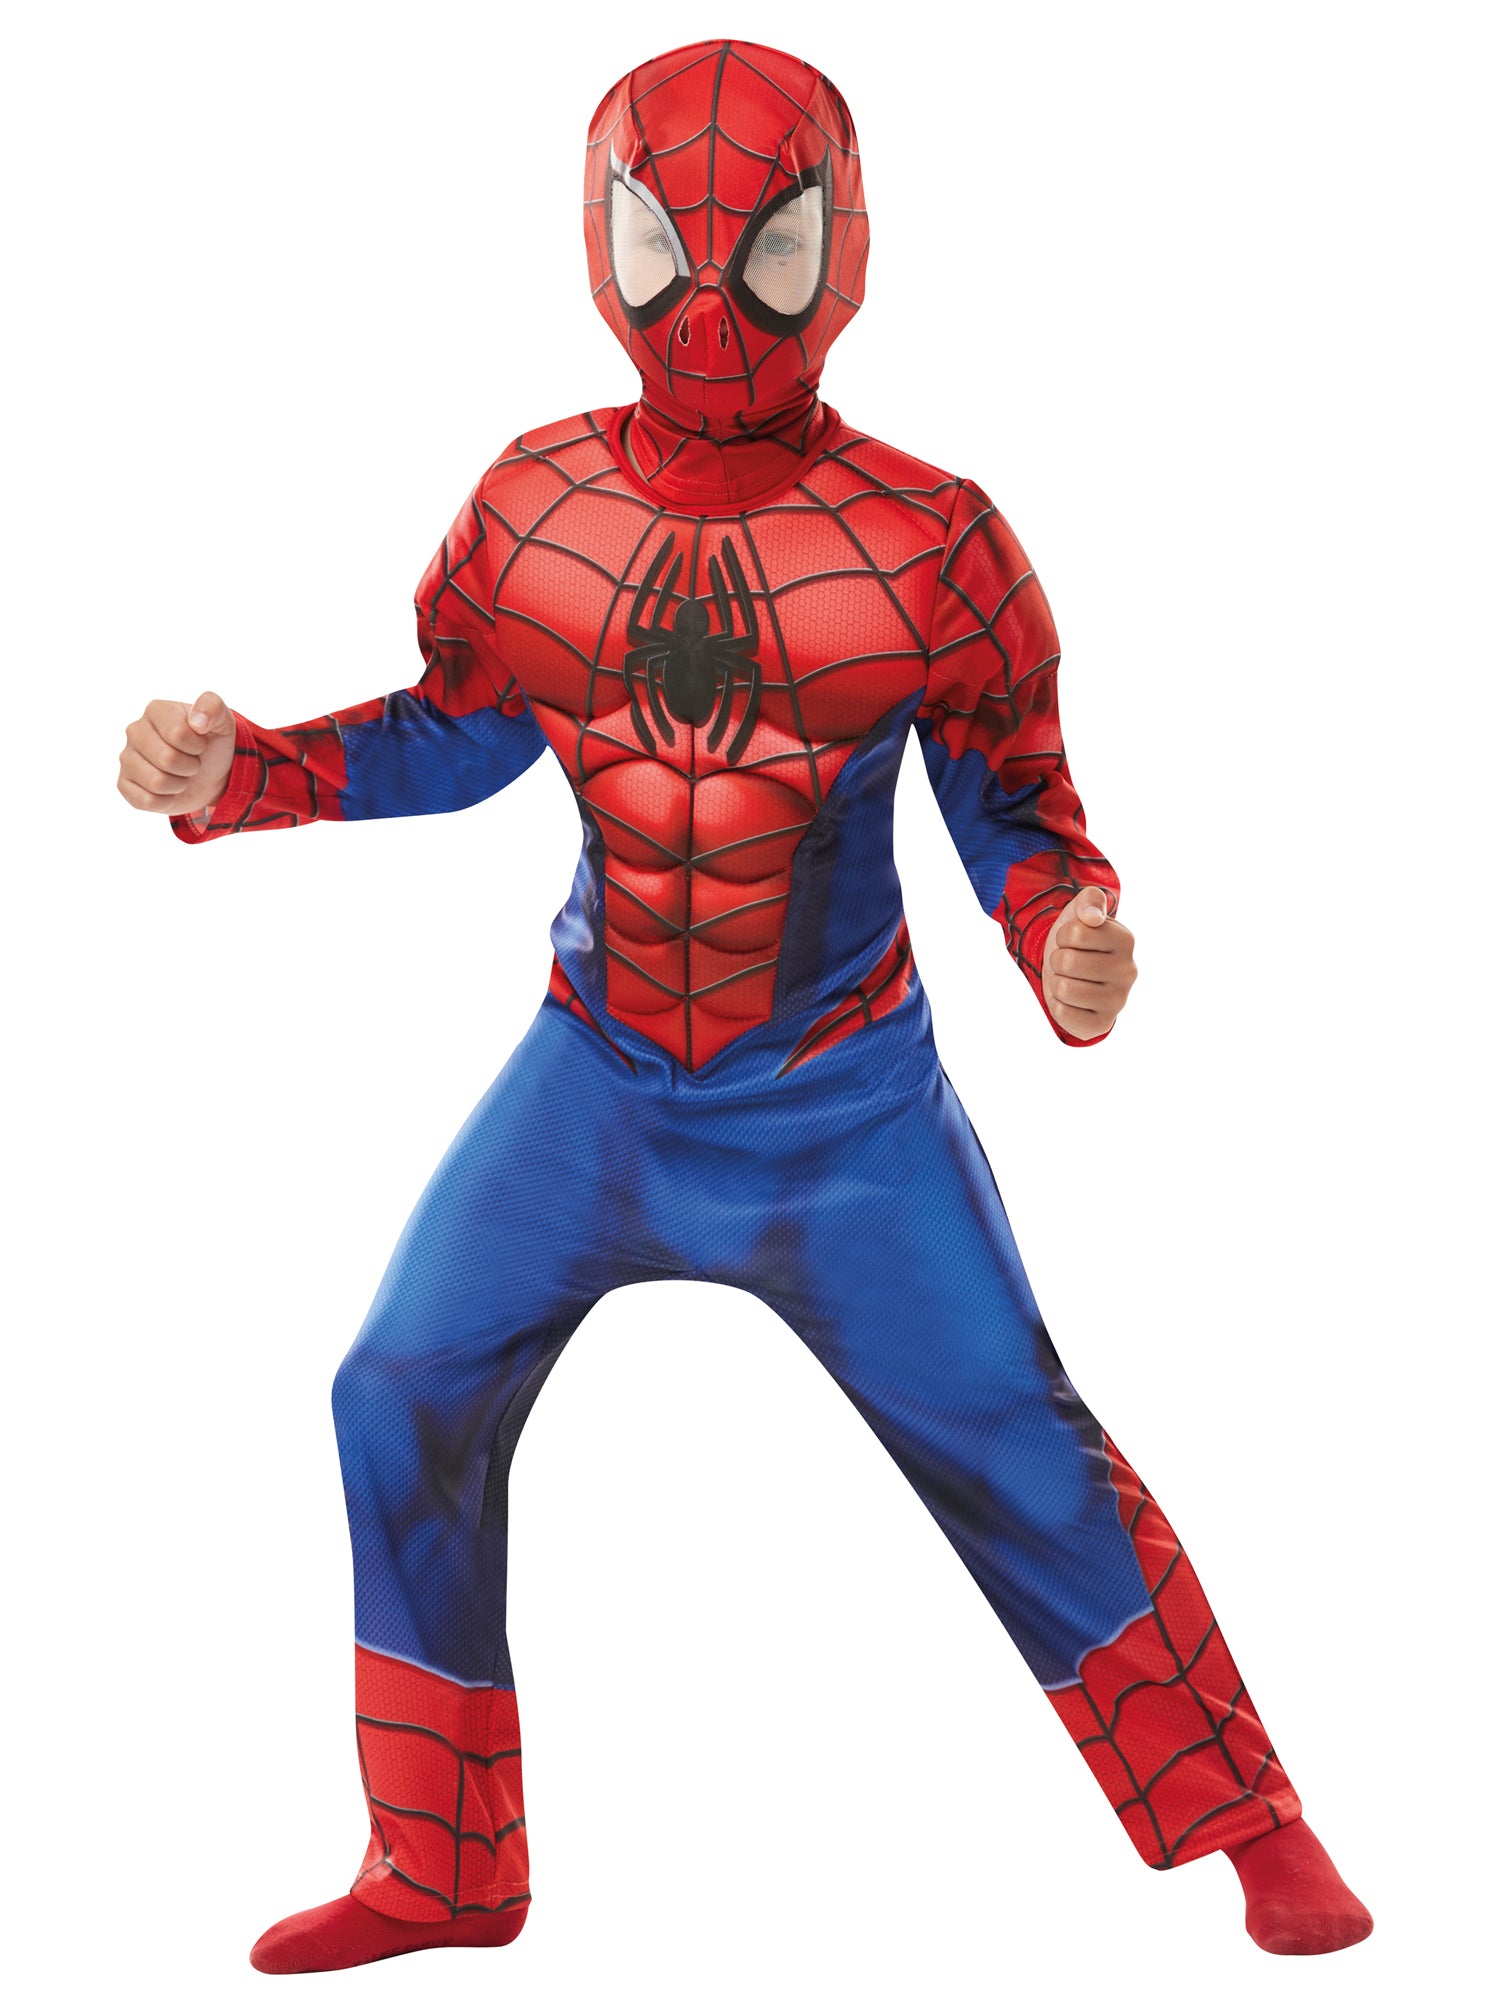 Spider-Man, Avengers, Multi, Marvel, Kids Costumes, Extra Large, Front